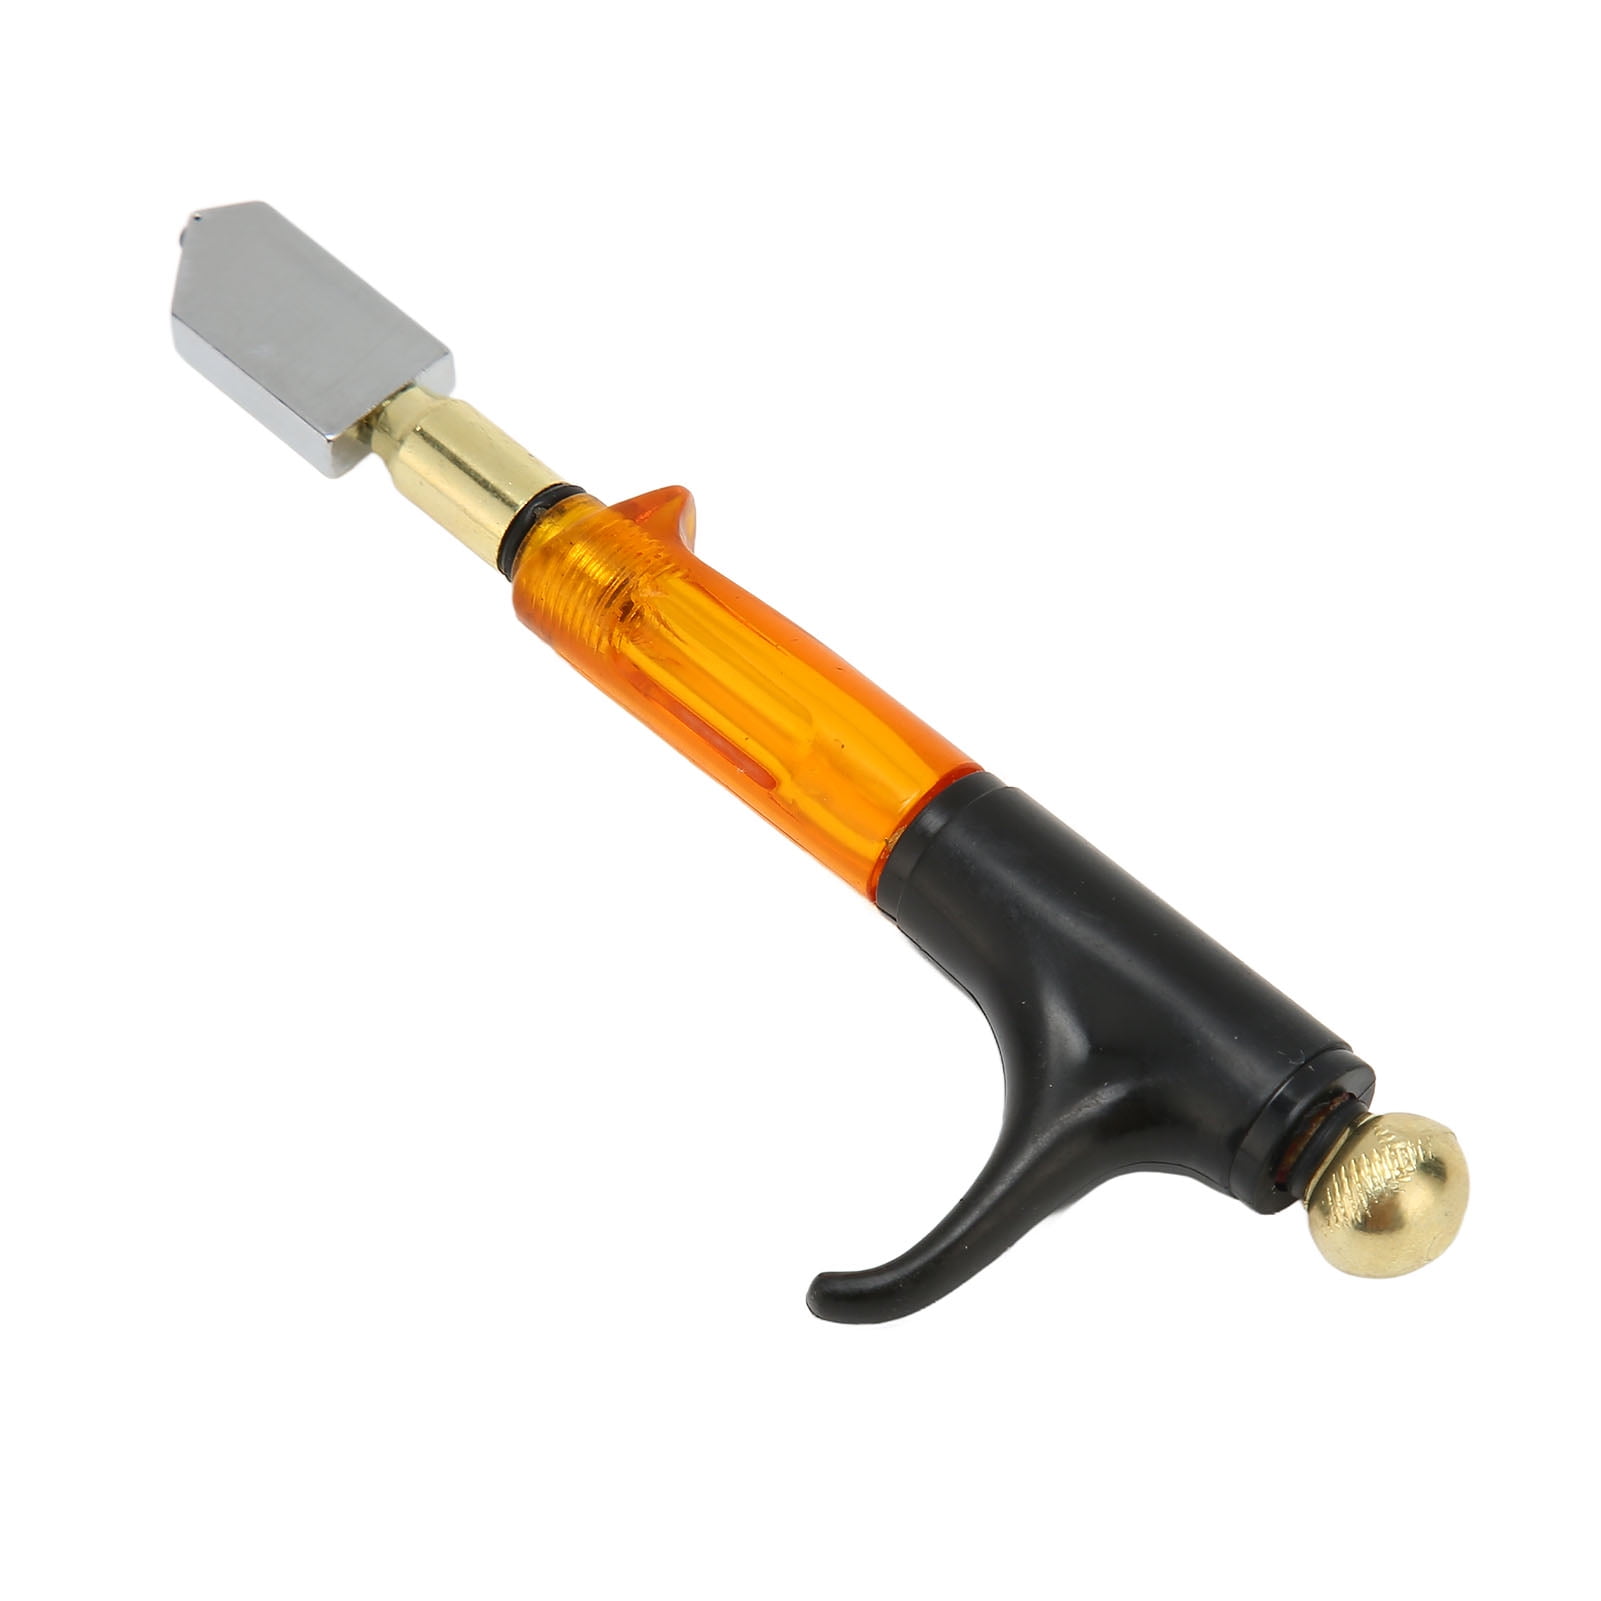 1pc New Handheld Glass Cutter Tool With Large Oil Filling Roller And  Multi-Functional Curved Handle For Glass Cutting